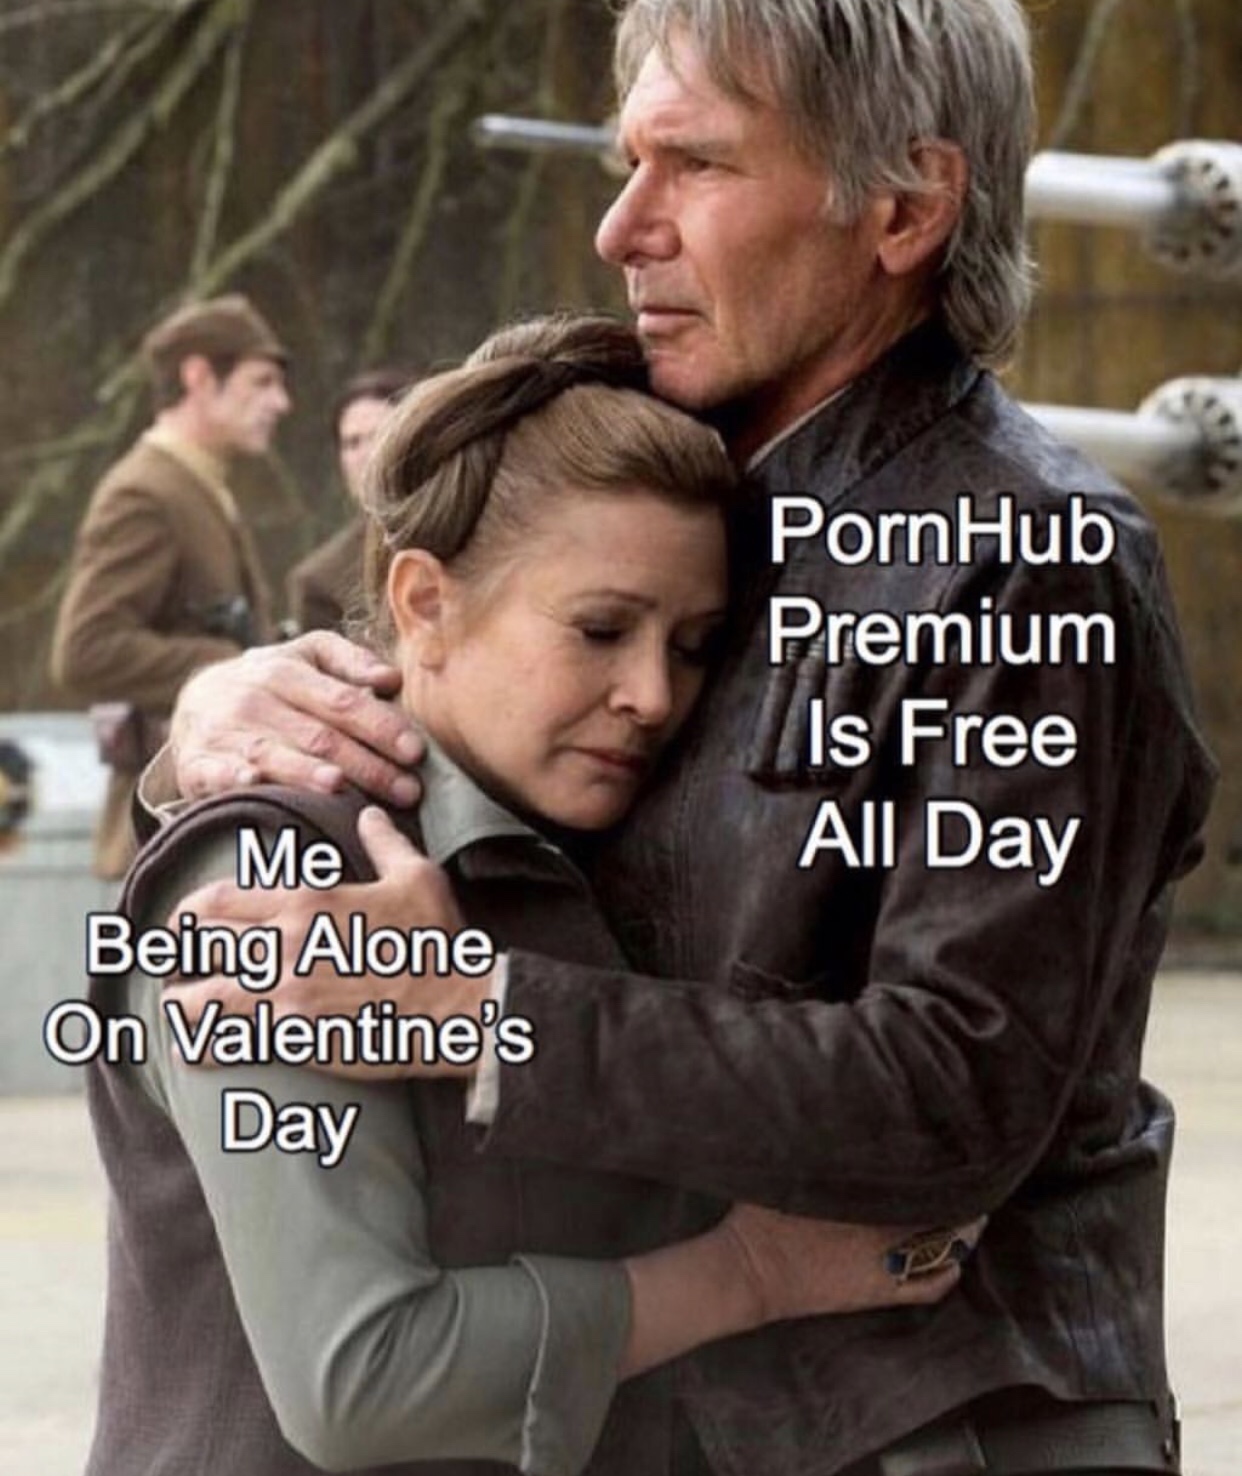 harrison ford and carrie fisher - PornHub Premium Is Free All Day Me Being Alone On Valentine's Day